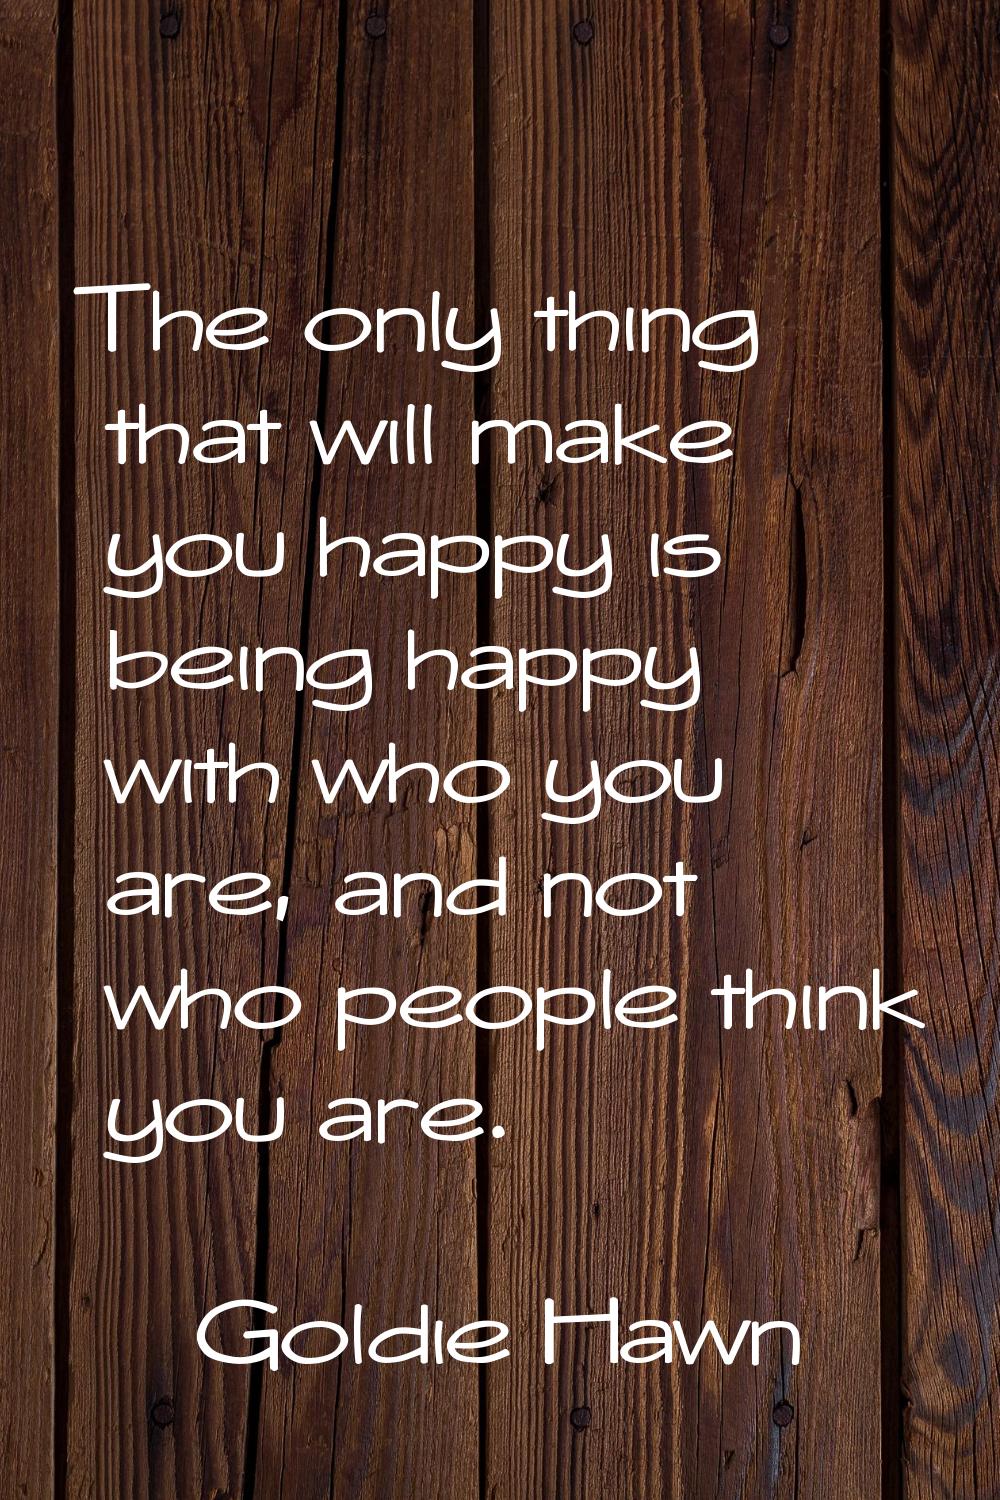 The only thing that will make you happy is being happy with who you are, and not who people think y